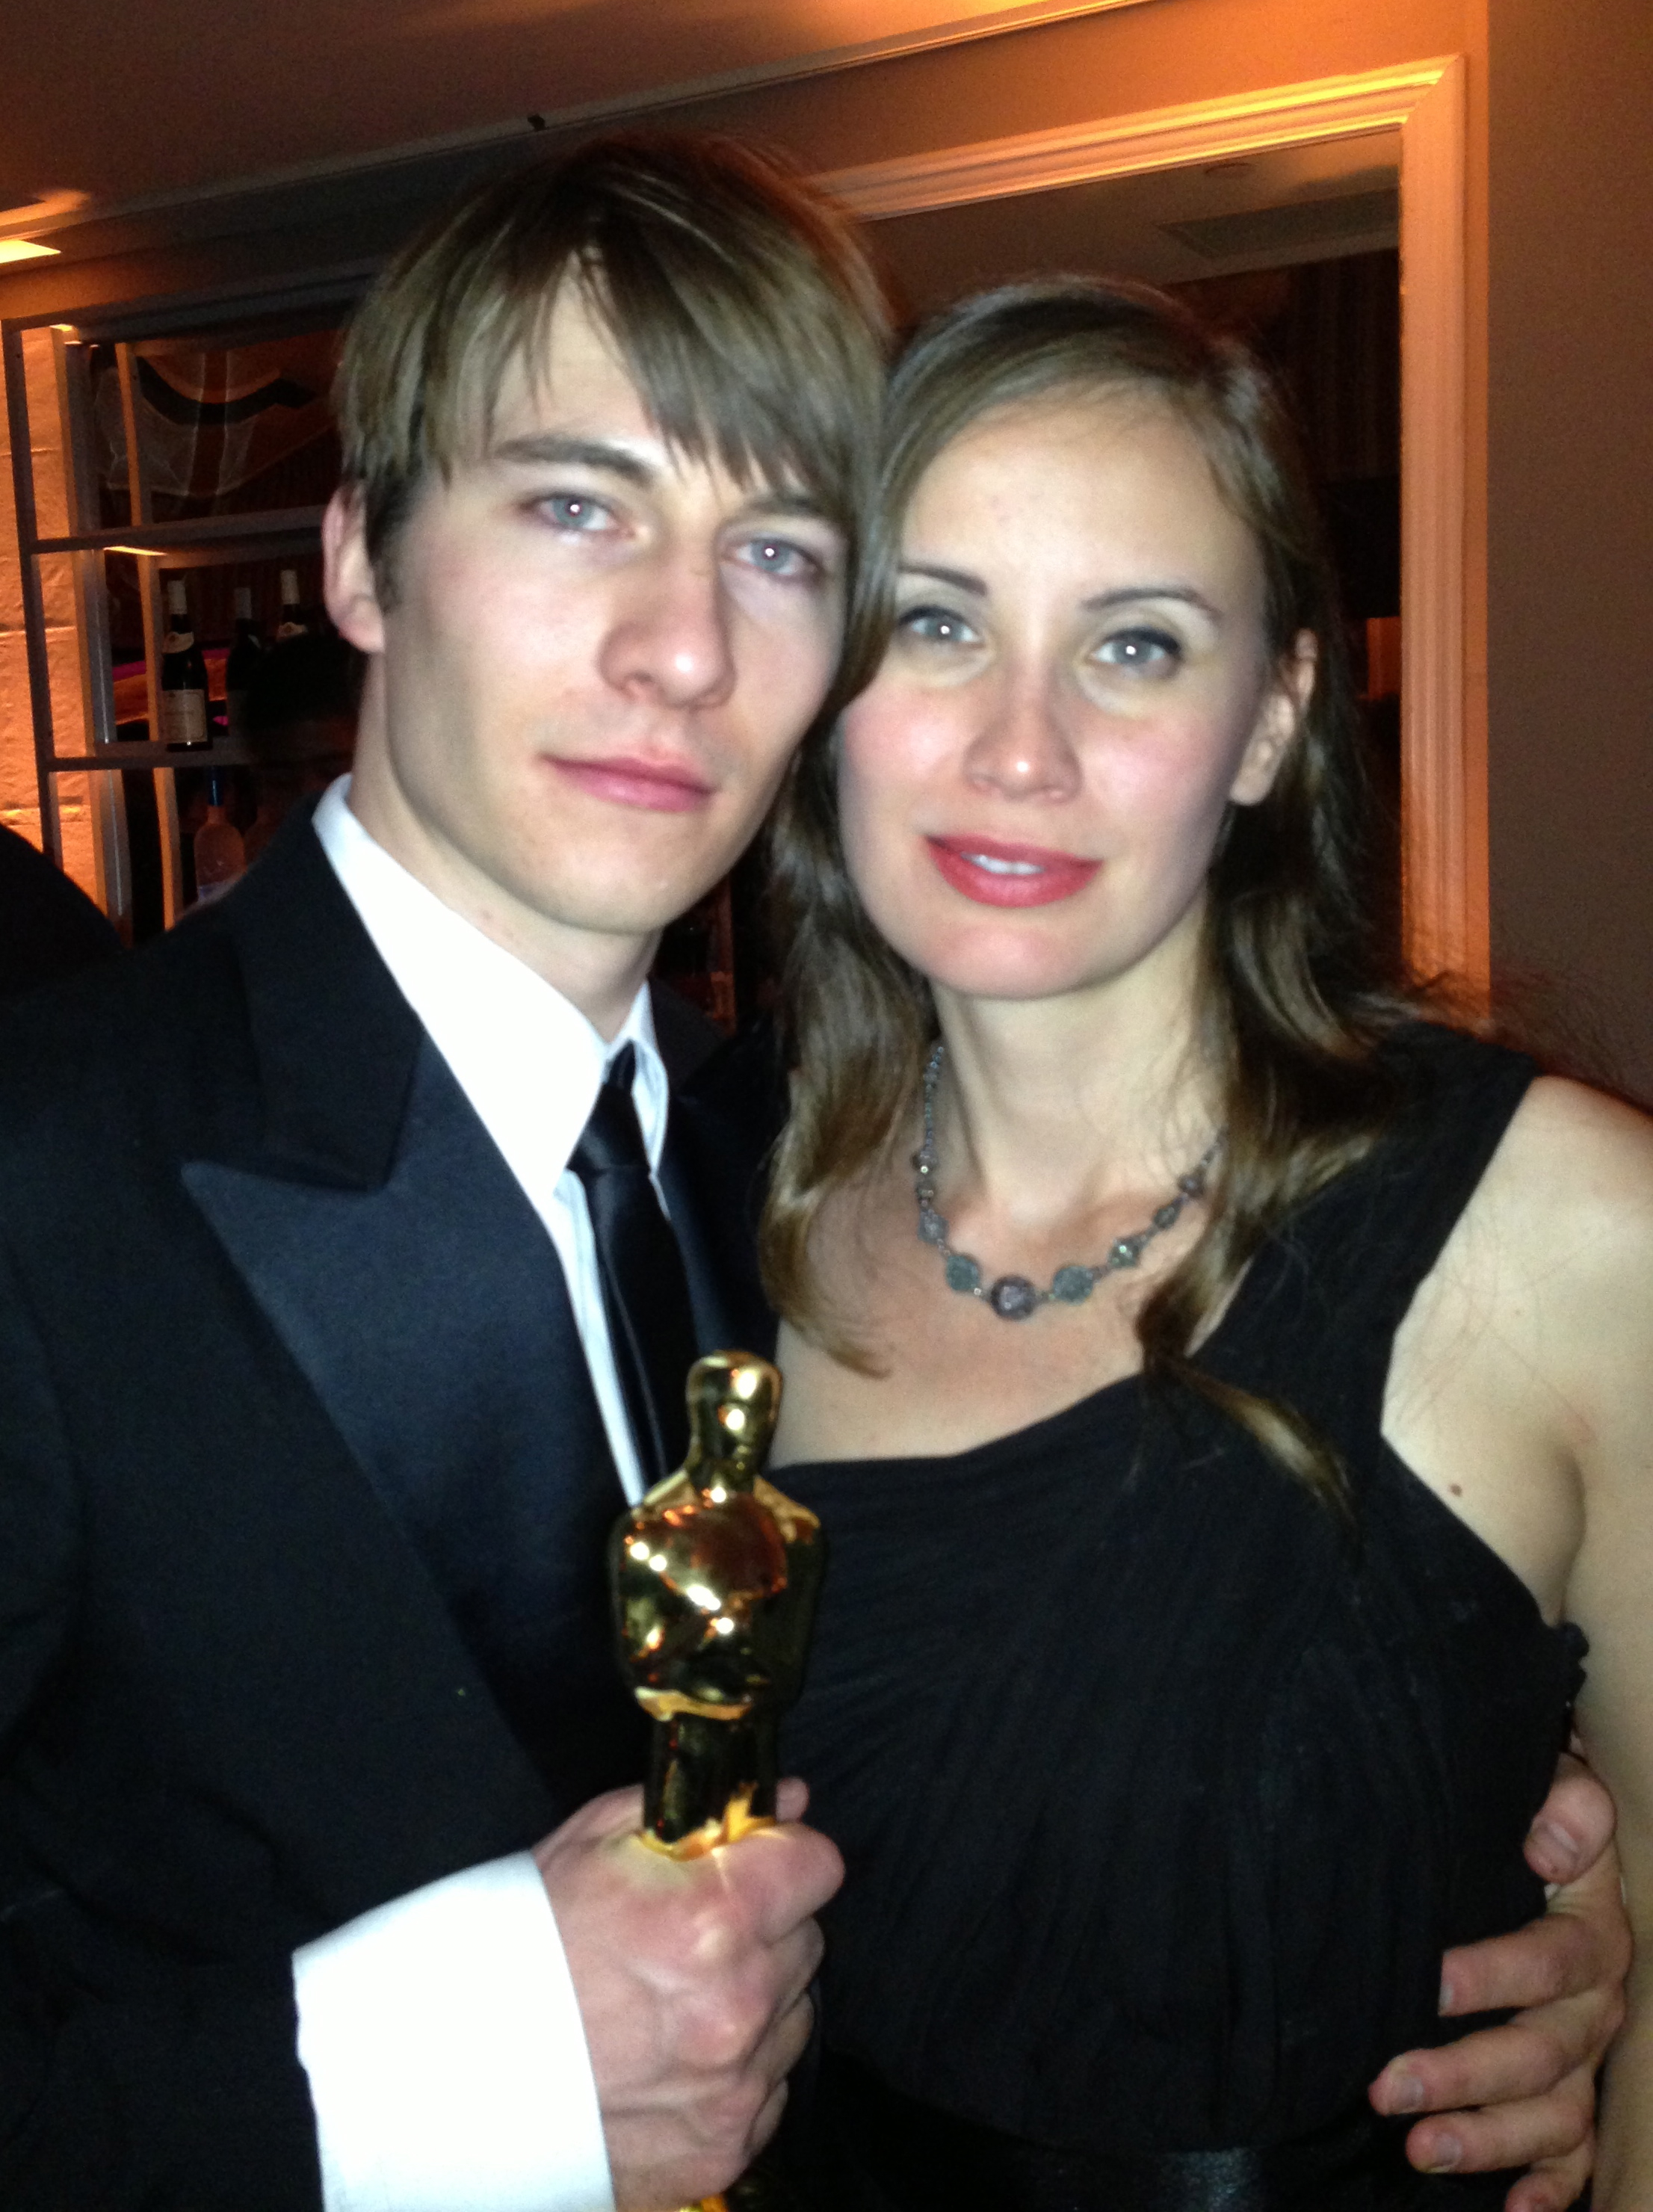 Andrew Napier and Amanda Tannen at the 2013 Vanity Fair Oscar Party.